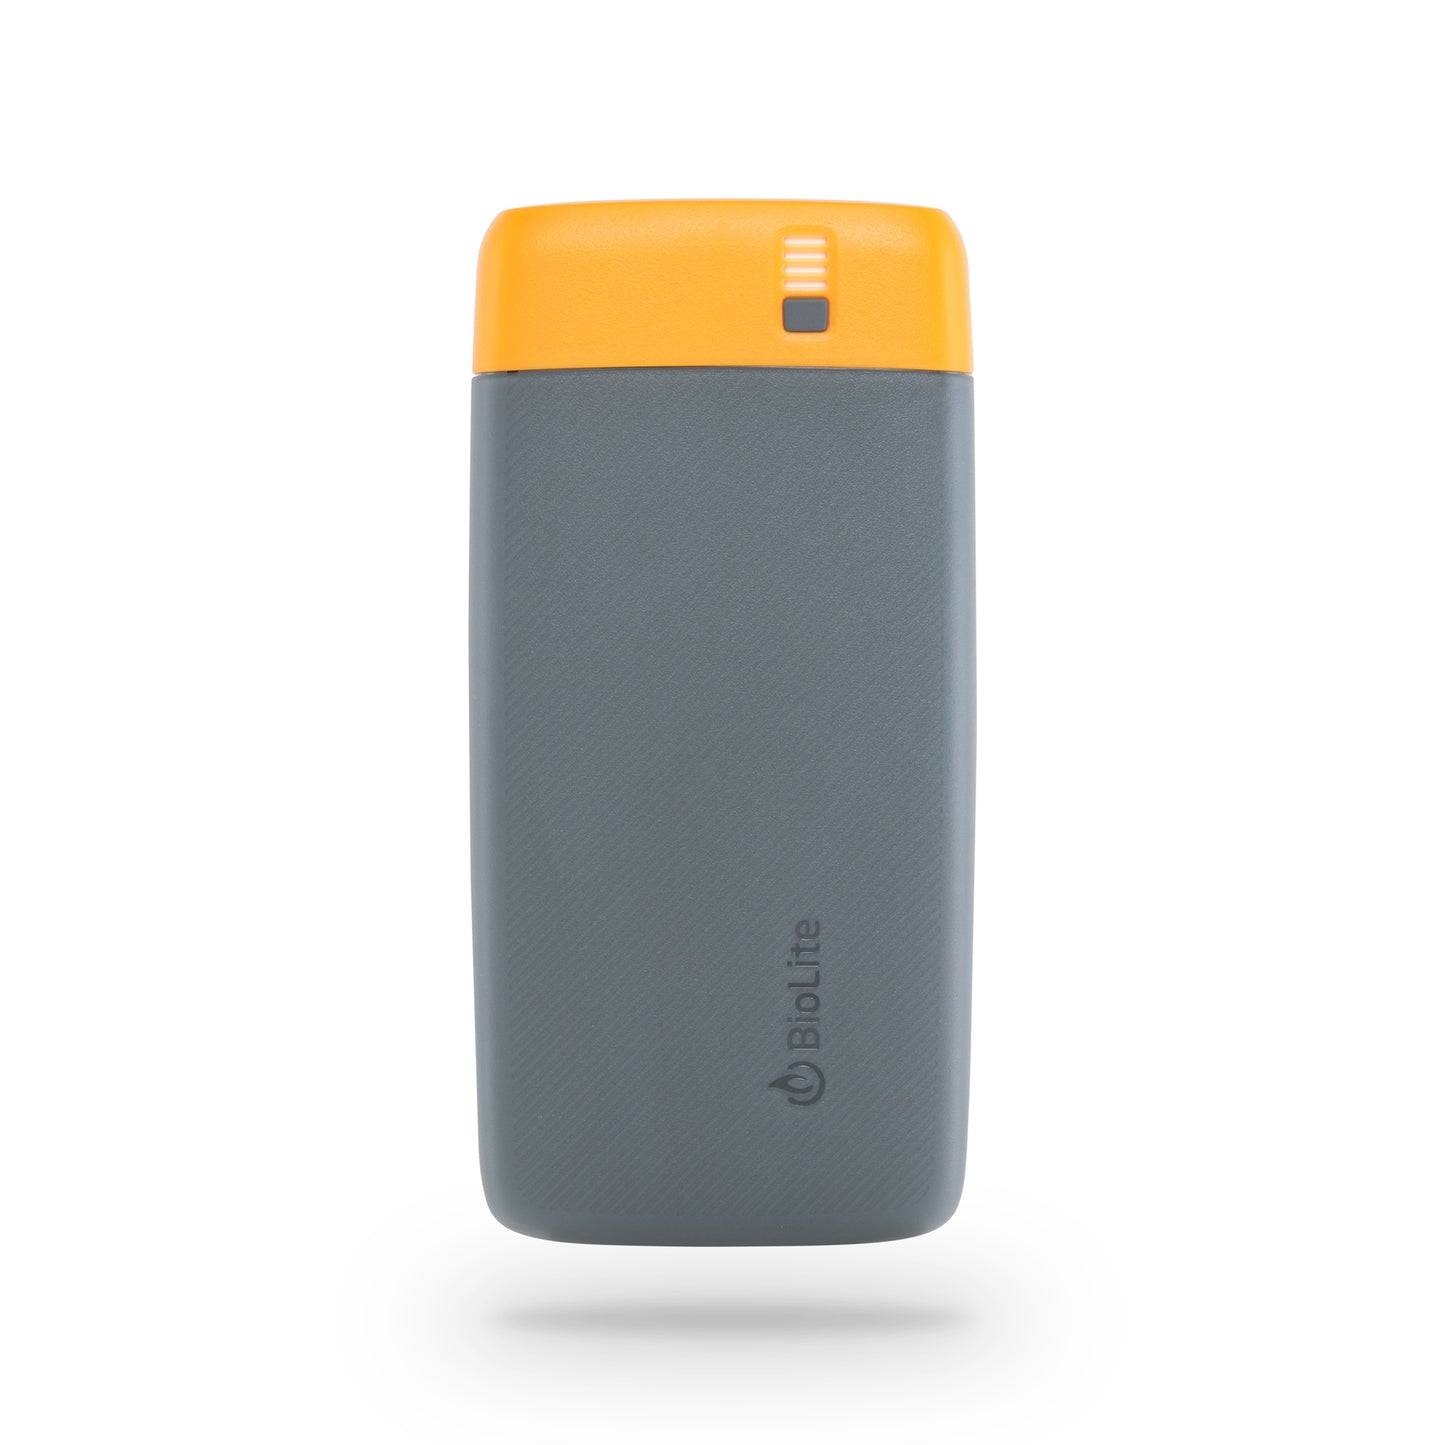 BioLite Charge 80 Portable Charger